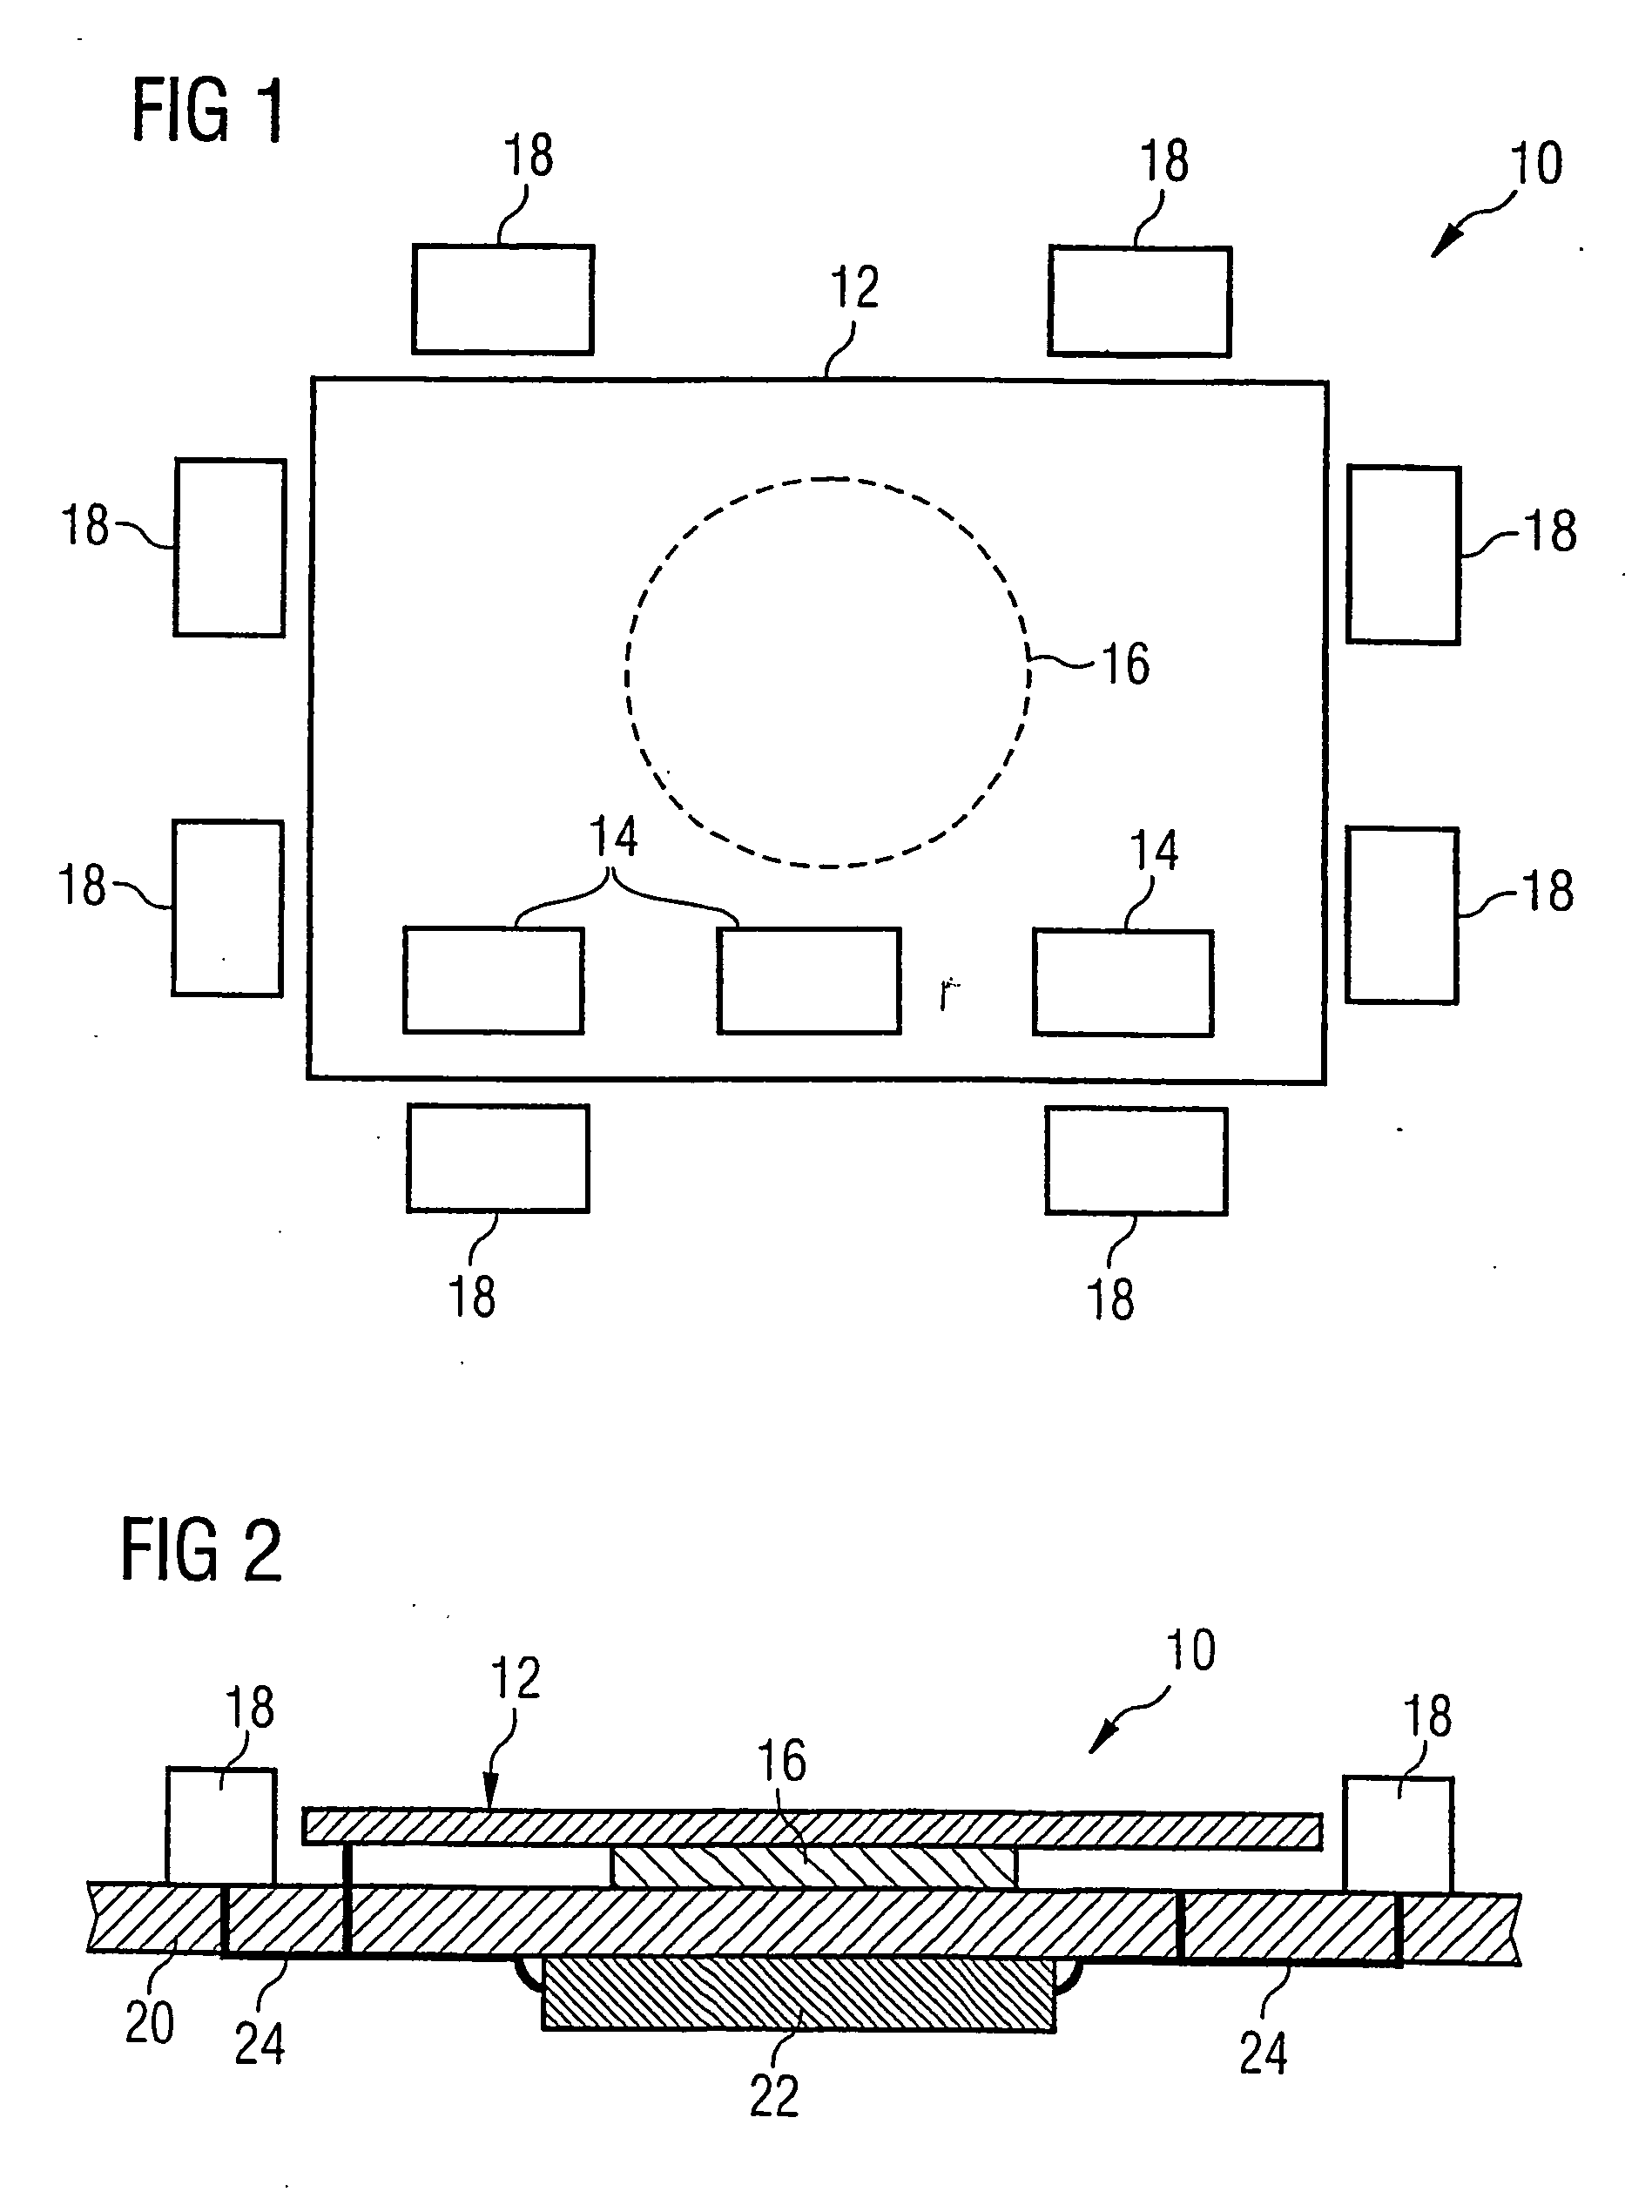 Display comprising and integrated loudspeaker and method for recognizing the touching of the display